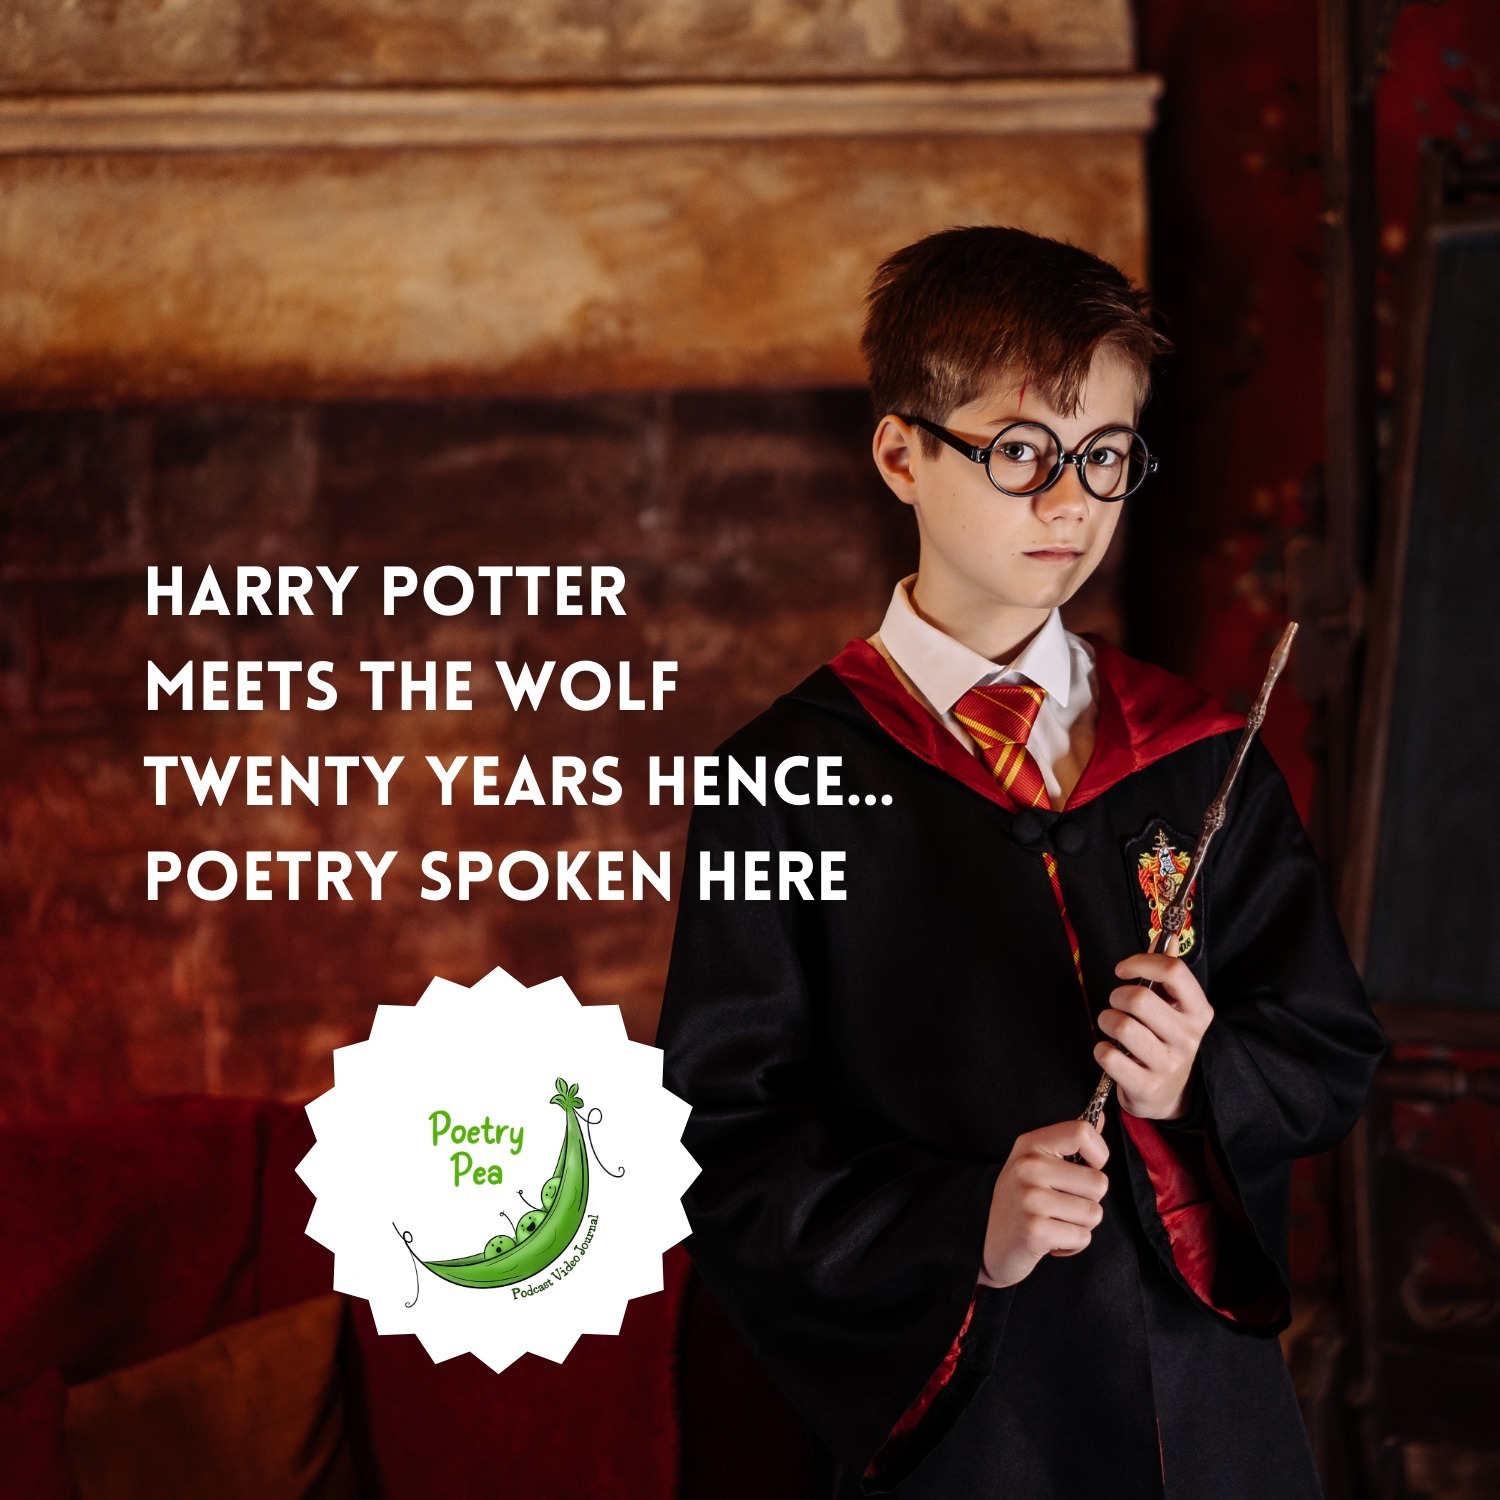 S7E9 Harry Potter meets the wolf twenty years hence - poetry spoken here